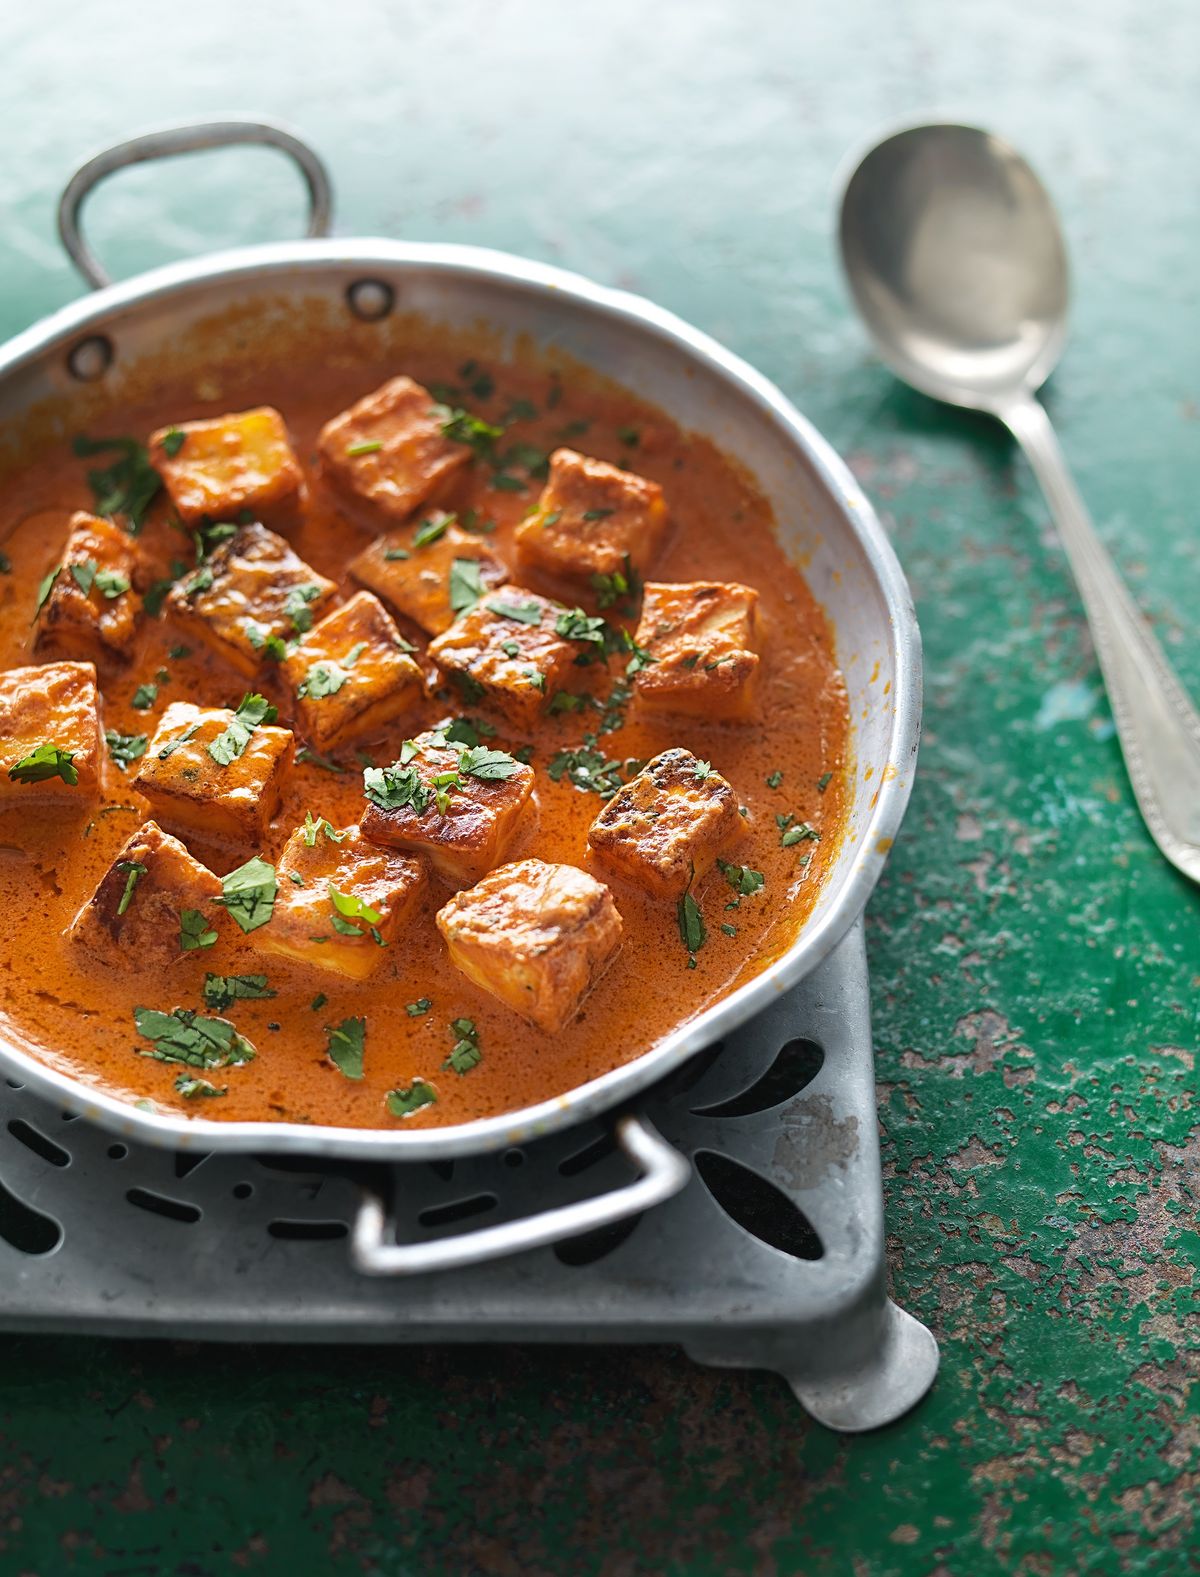 Fresh Indian Cheese in a Butter-tomato Sauce (Paneer Makhani)